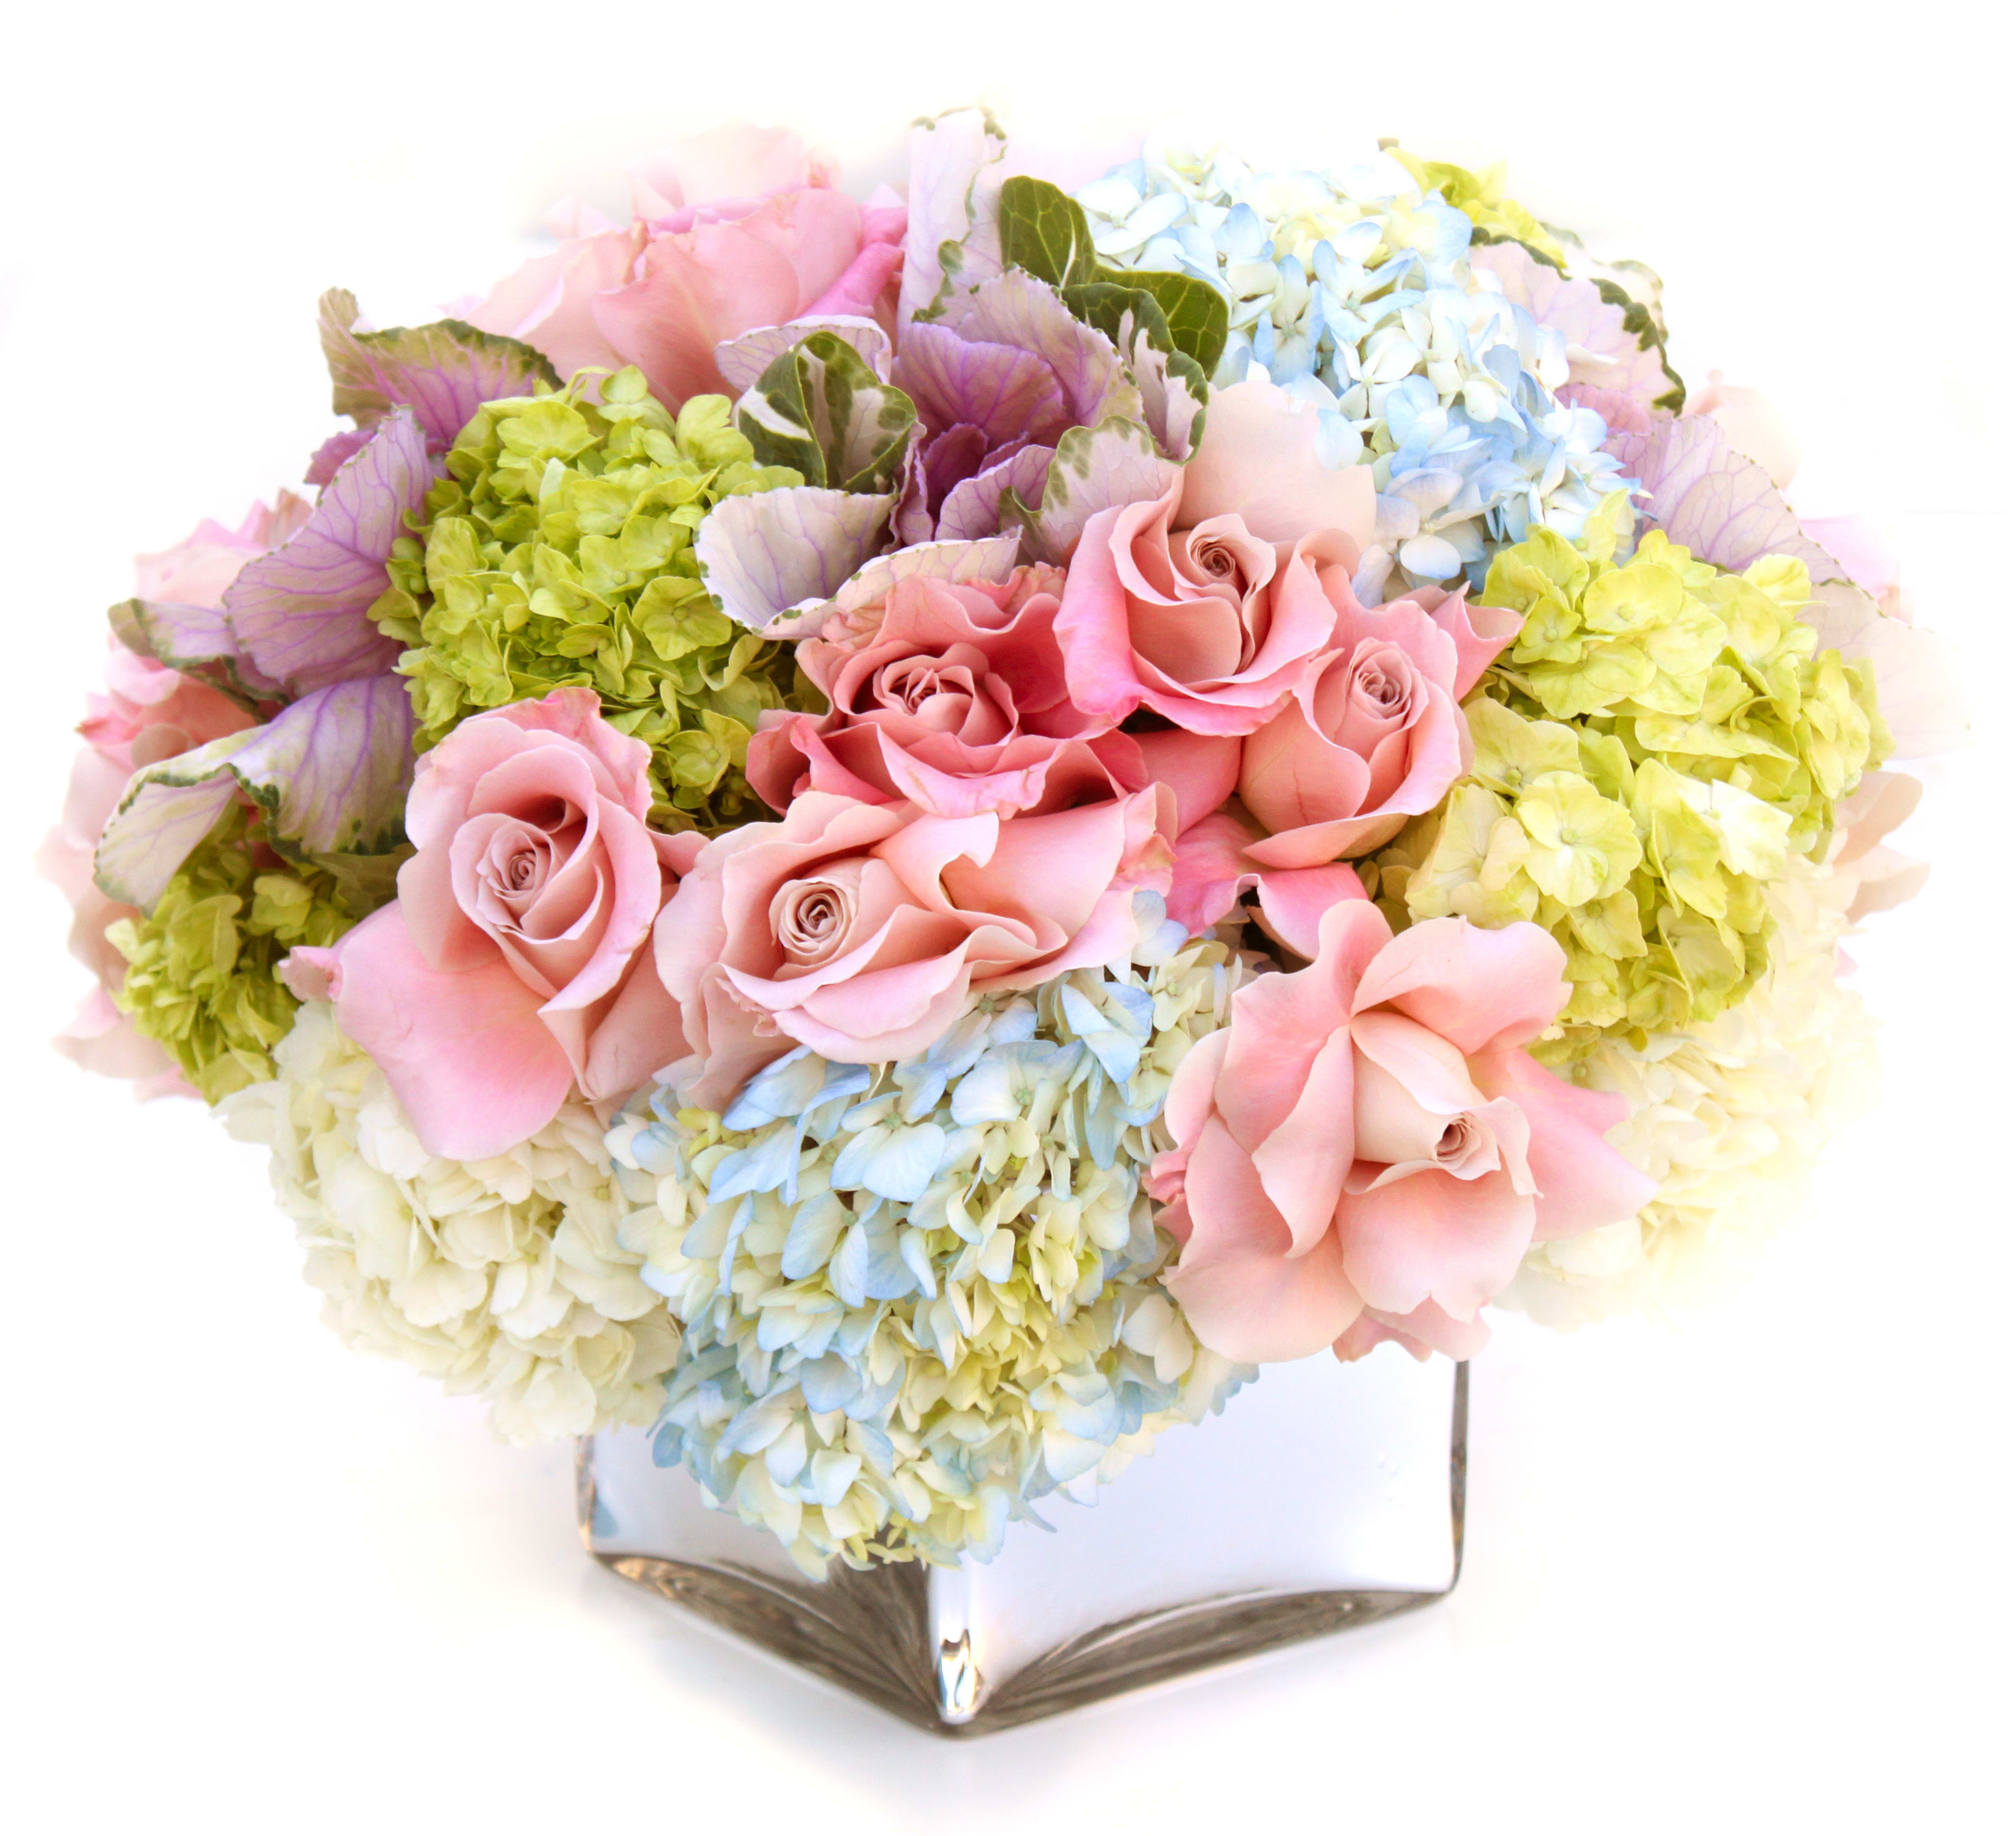 Pure Pastel - A perfect pastel mix of blooms, including pink roses and blue &amp; green hydrangeas.